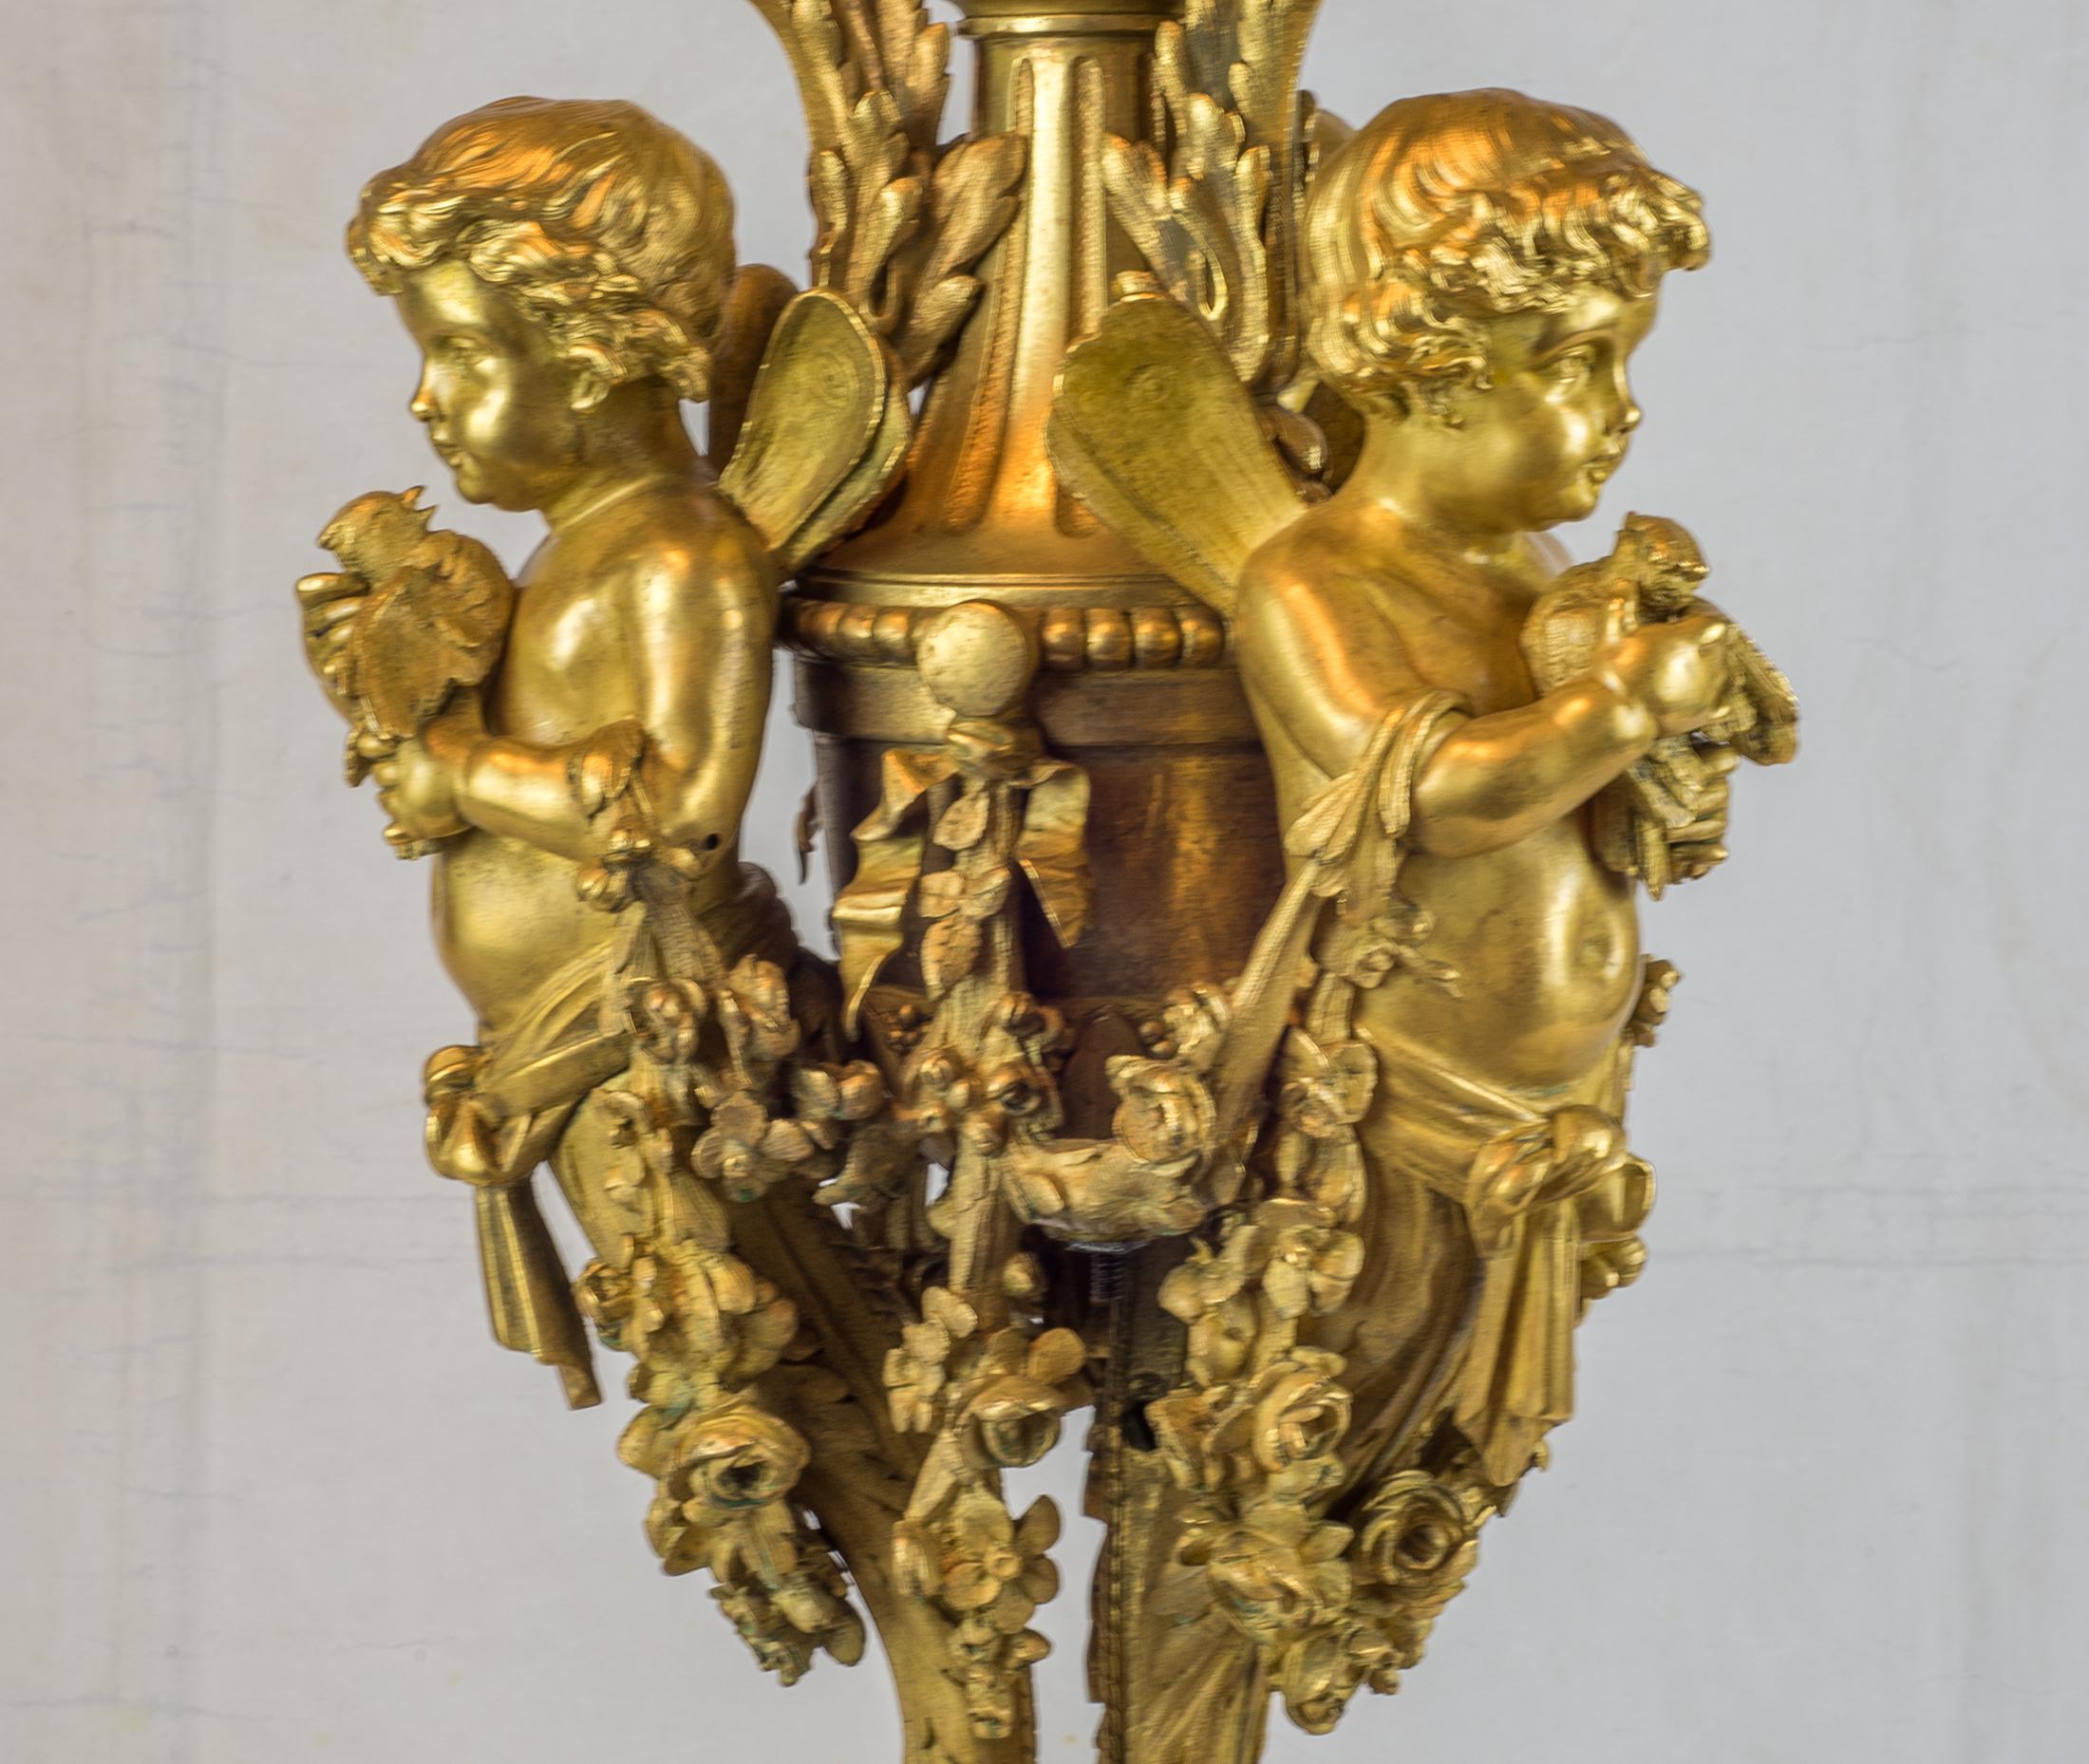 Important Pair of 19th Century French Ormolu Ten-Light Candelabra by H. Picard For Sale 1